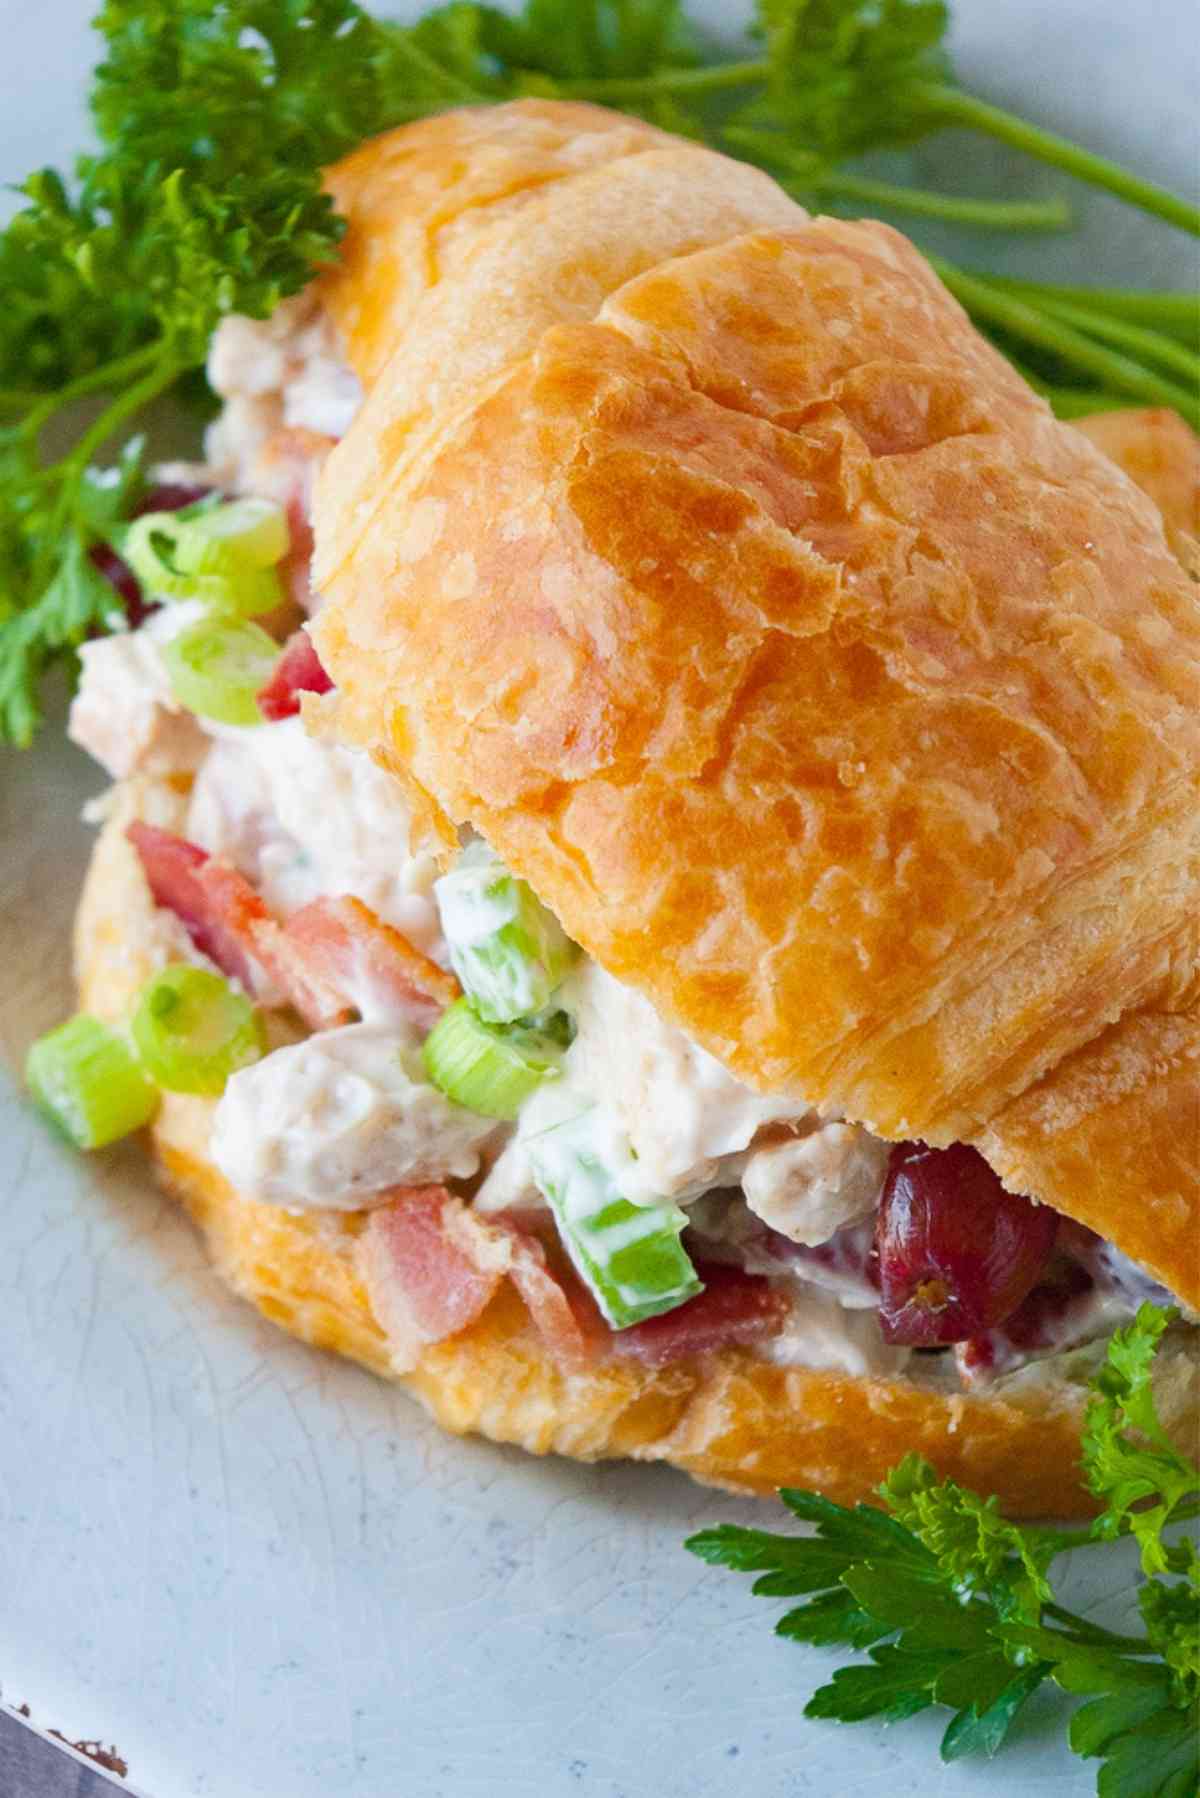 Croissant filled with chicken salad.